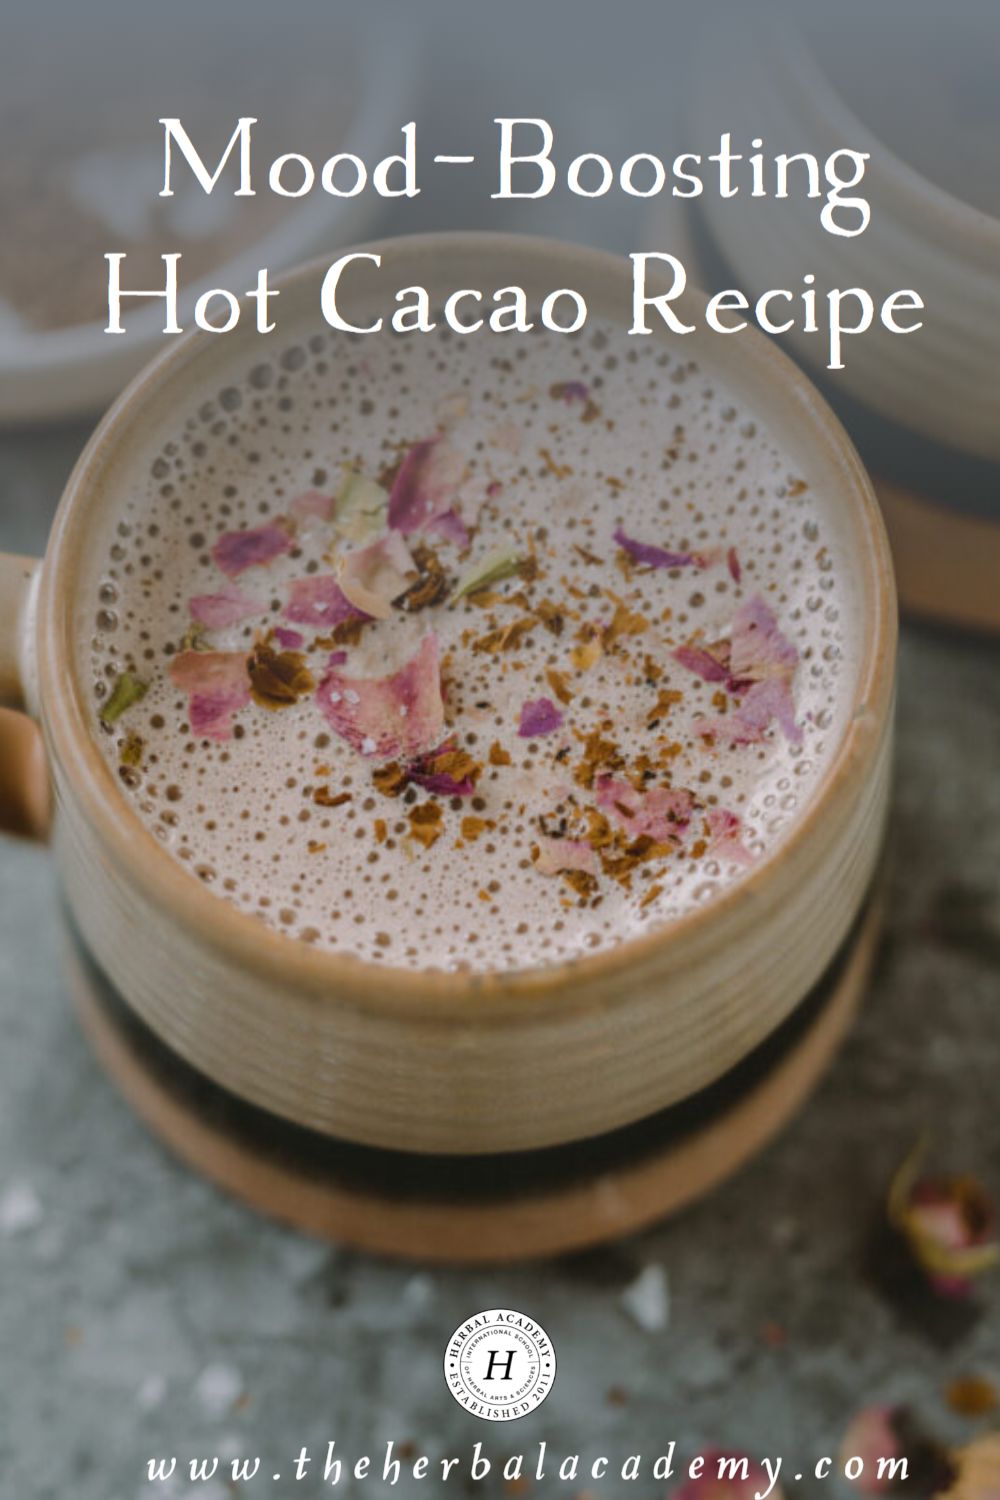 Mood-Boosting Hot Cacao Recipe | Herbal Academy | This mood-boosting cacao can be a great holistic pick-me-up, as it not only tastes fantastic but its ingredients support mood and mental well-being.